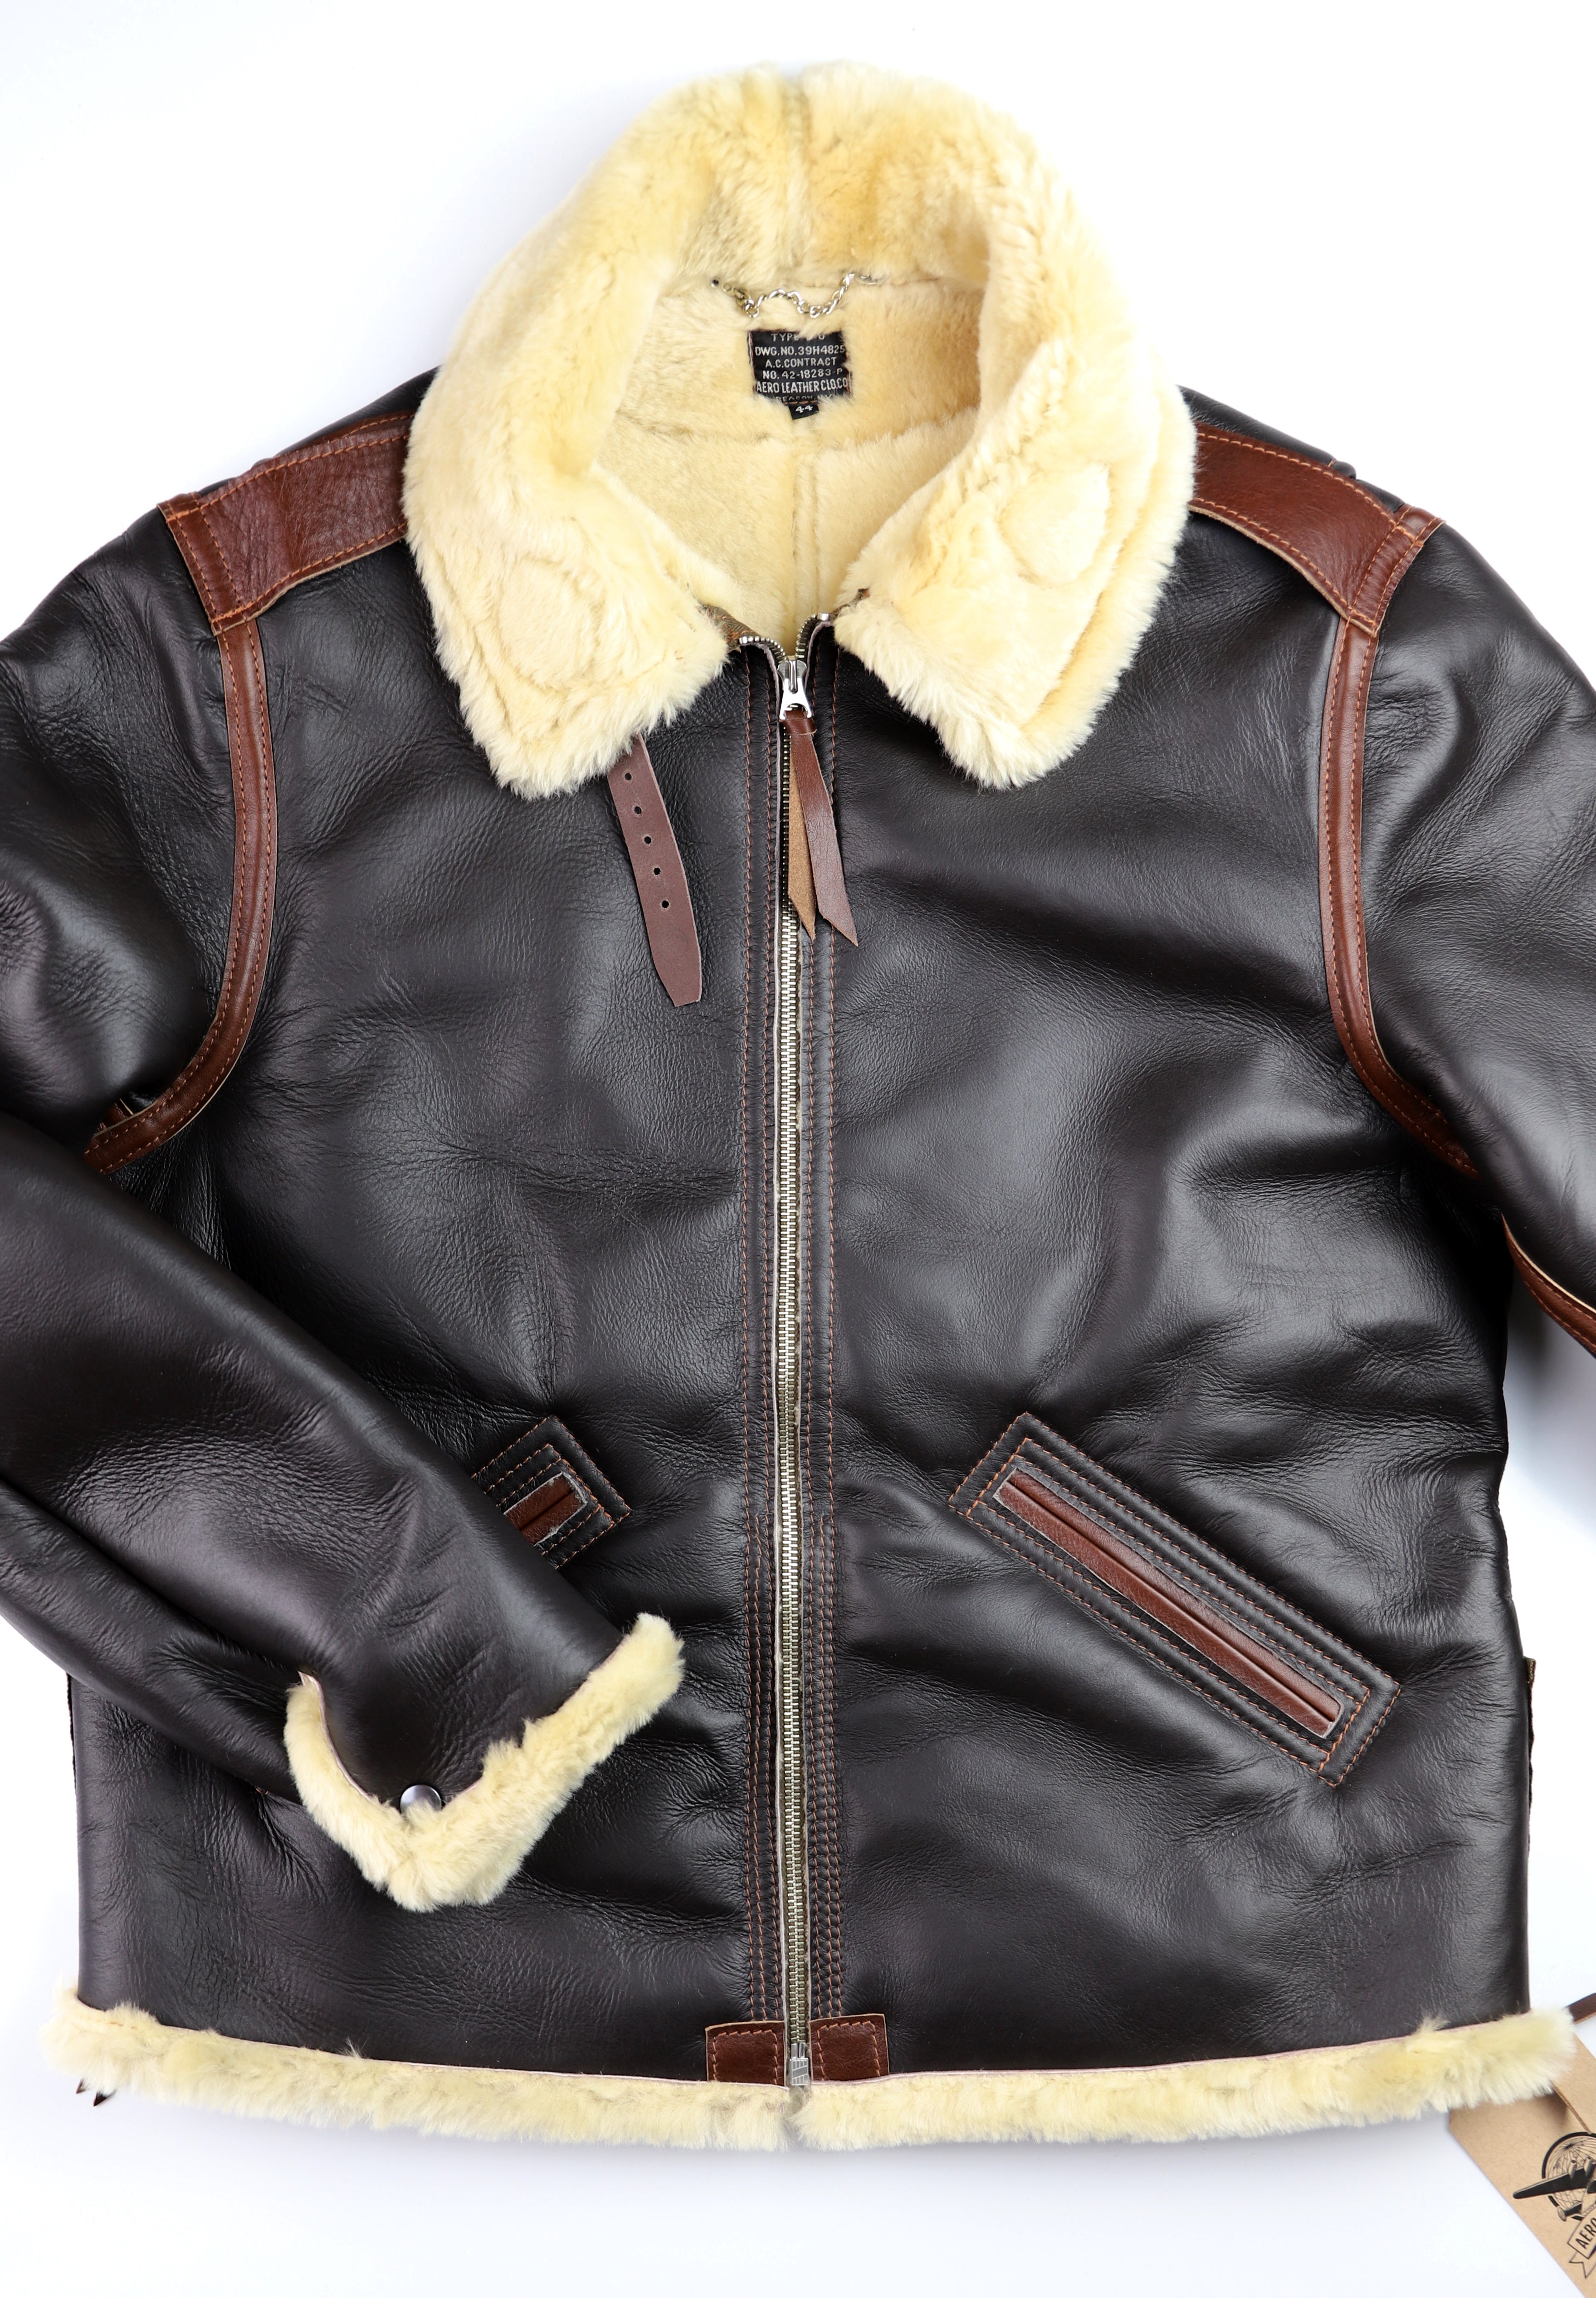 Aero Two-Tone B-6 Military Flight Jacket, size 44, Seal Brown with Russet Vicenza Horsehide Trim